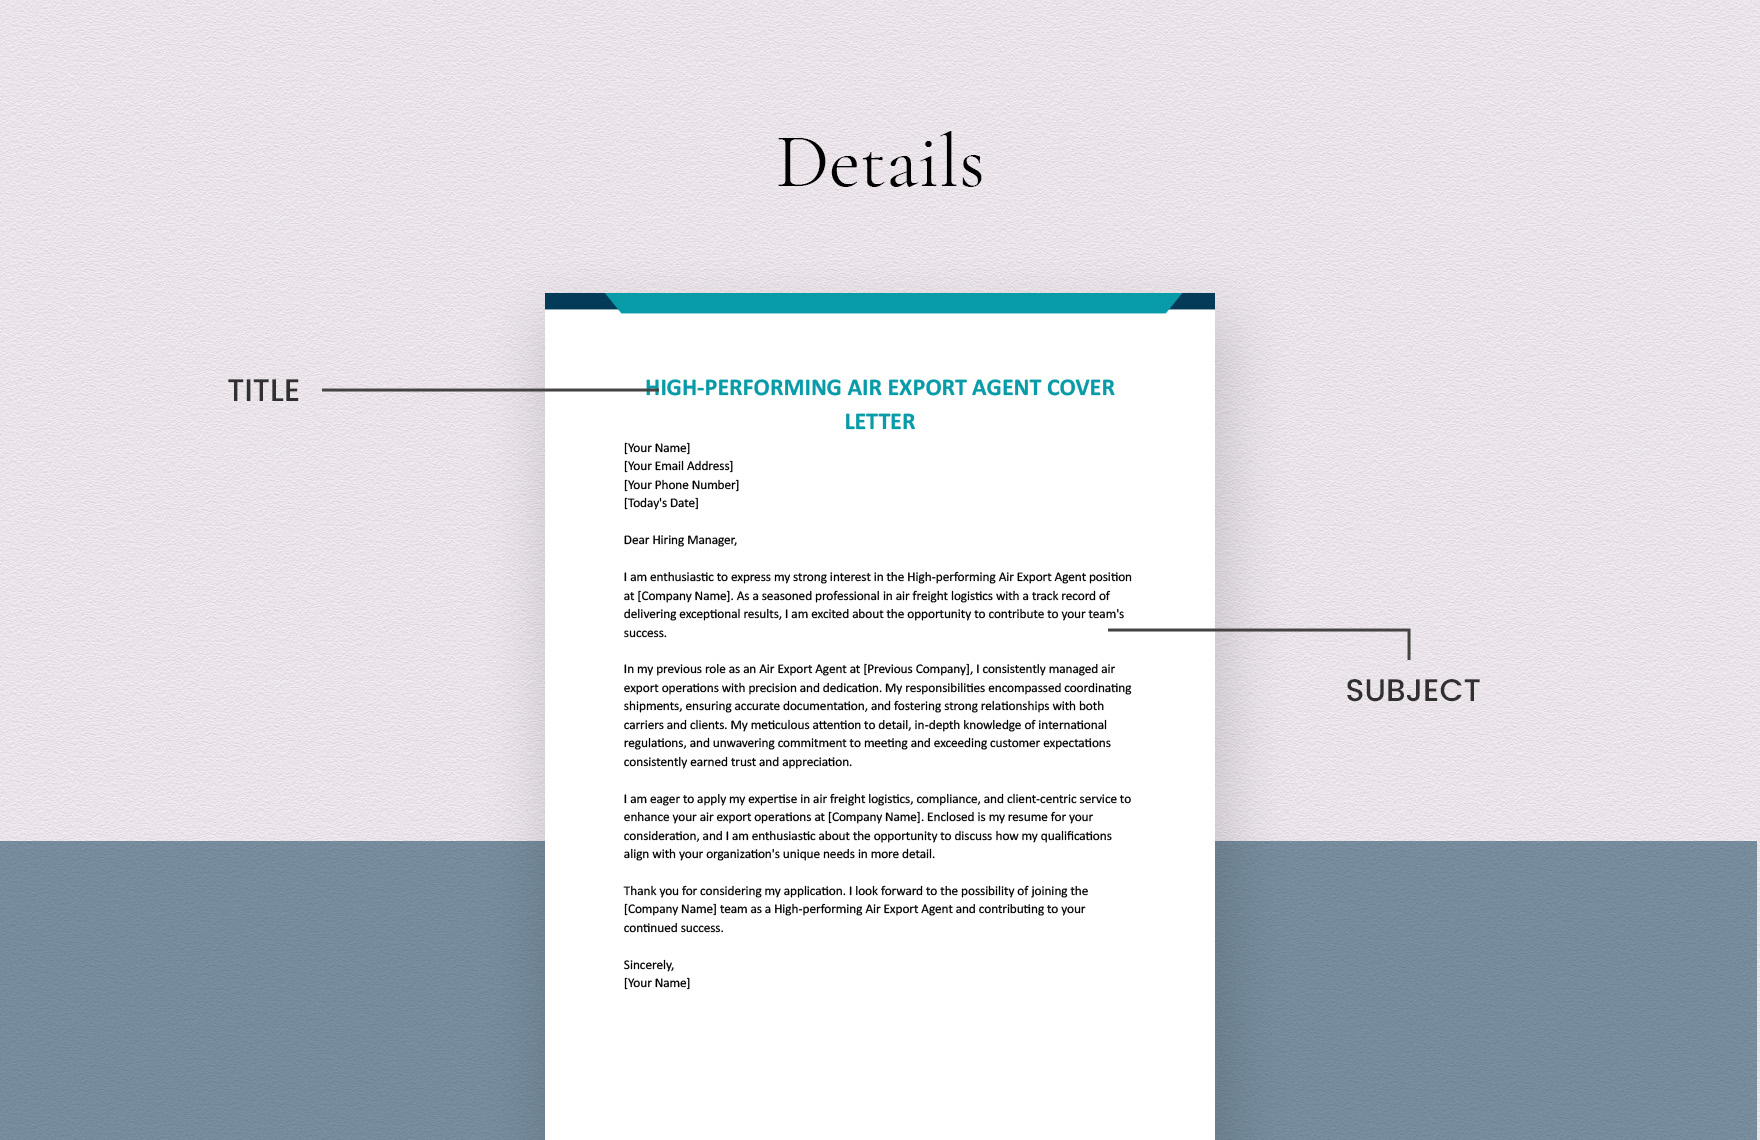 High-performing Air Export Agent Cover Letter